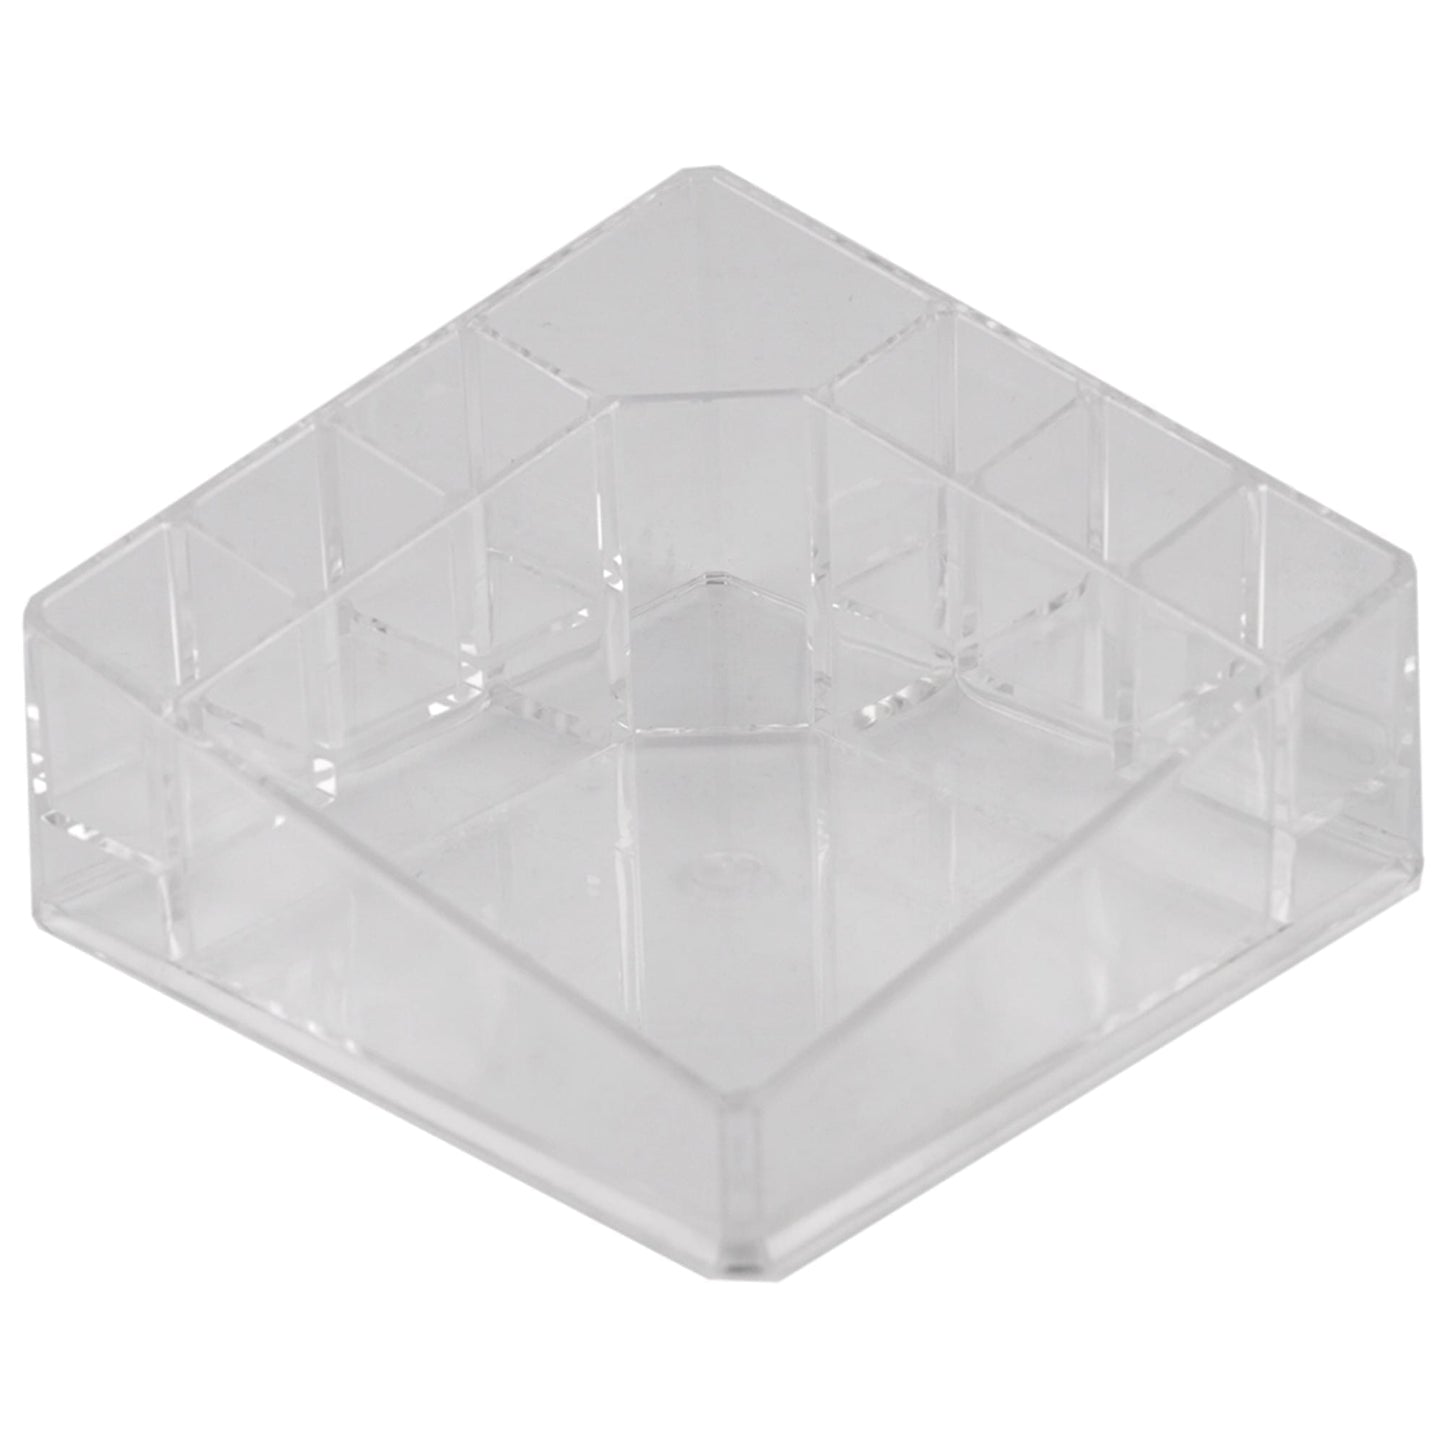 Small Square Shatter-Resistant Plastic 8 Compartment Cosmetic Organizer, Clear